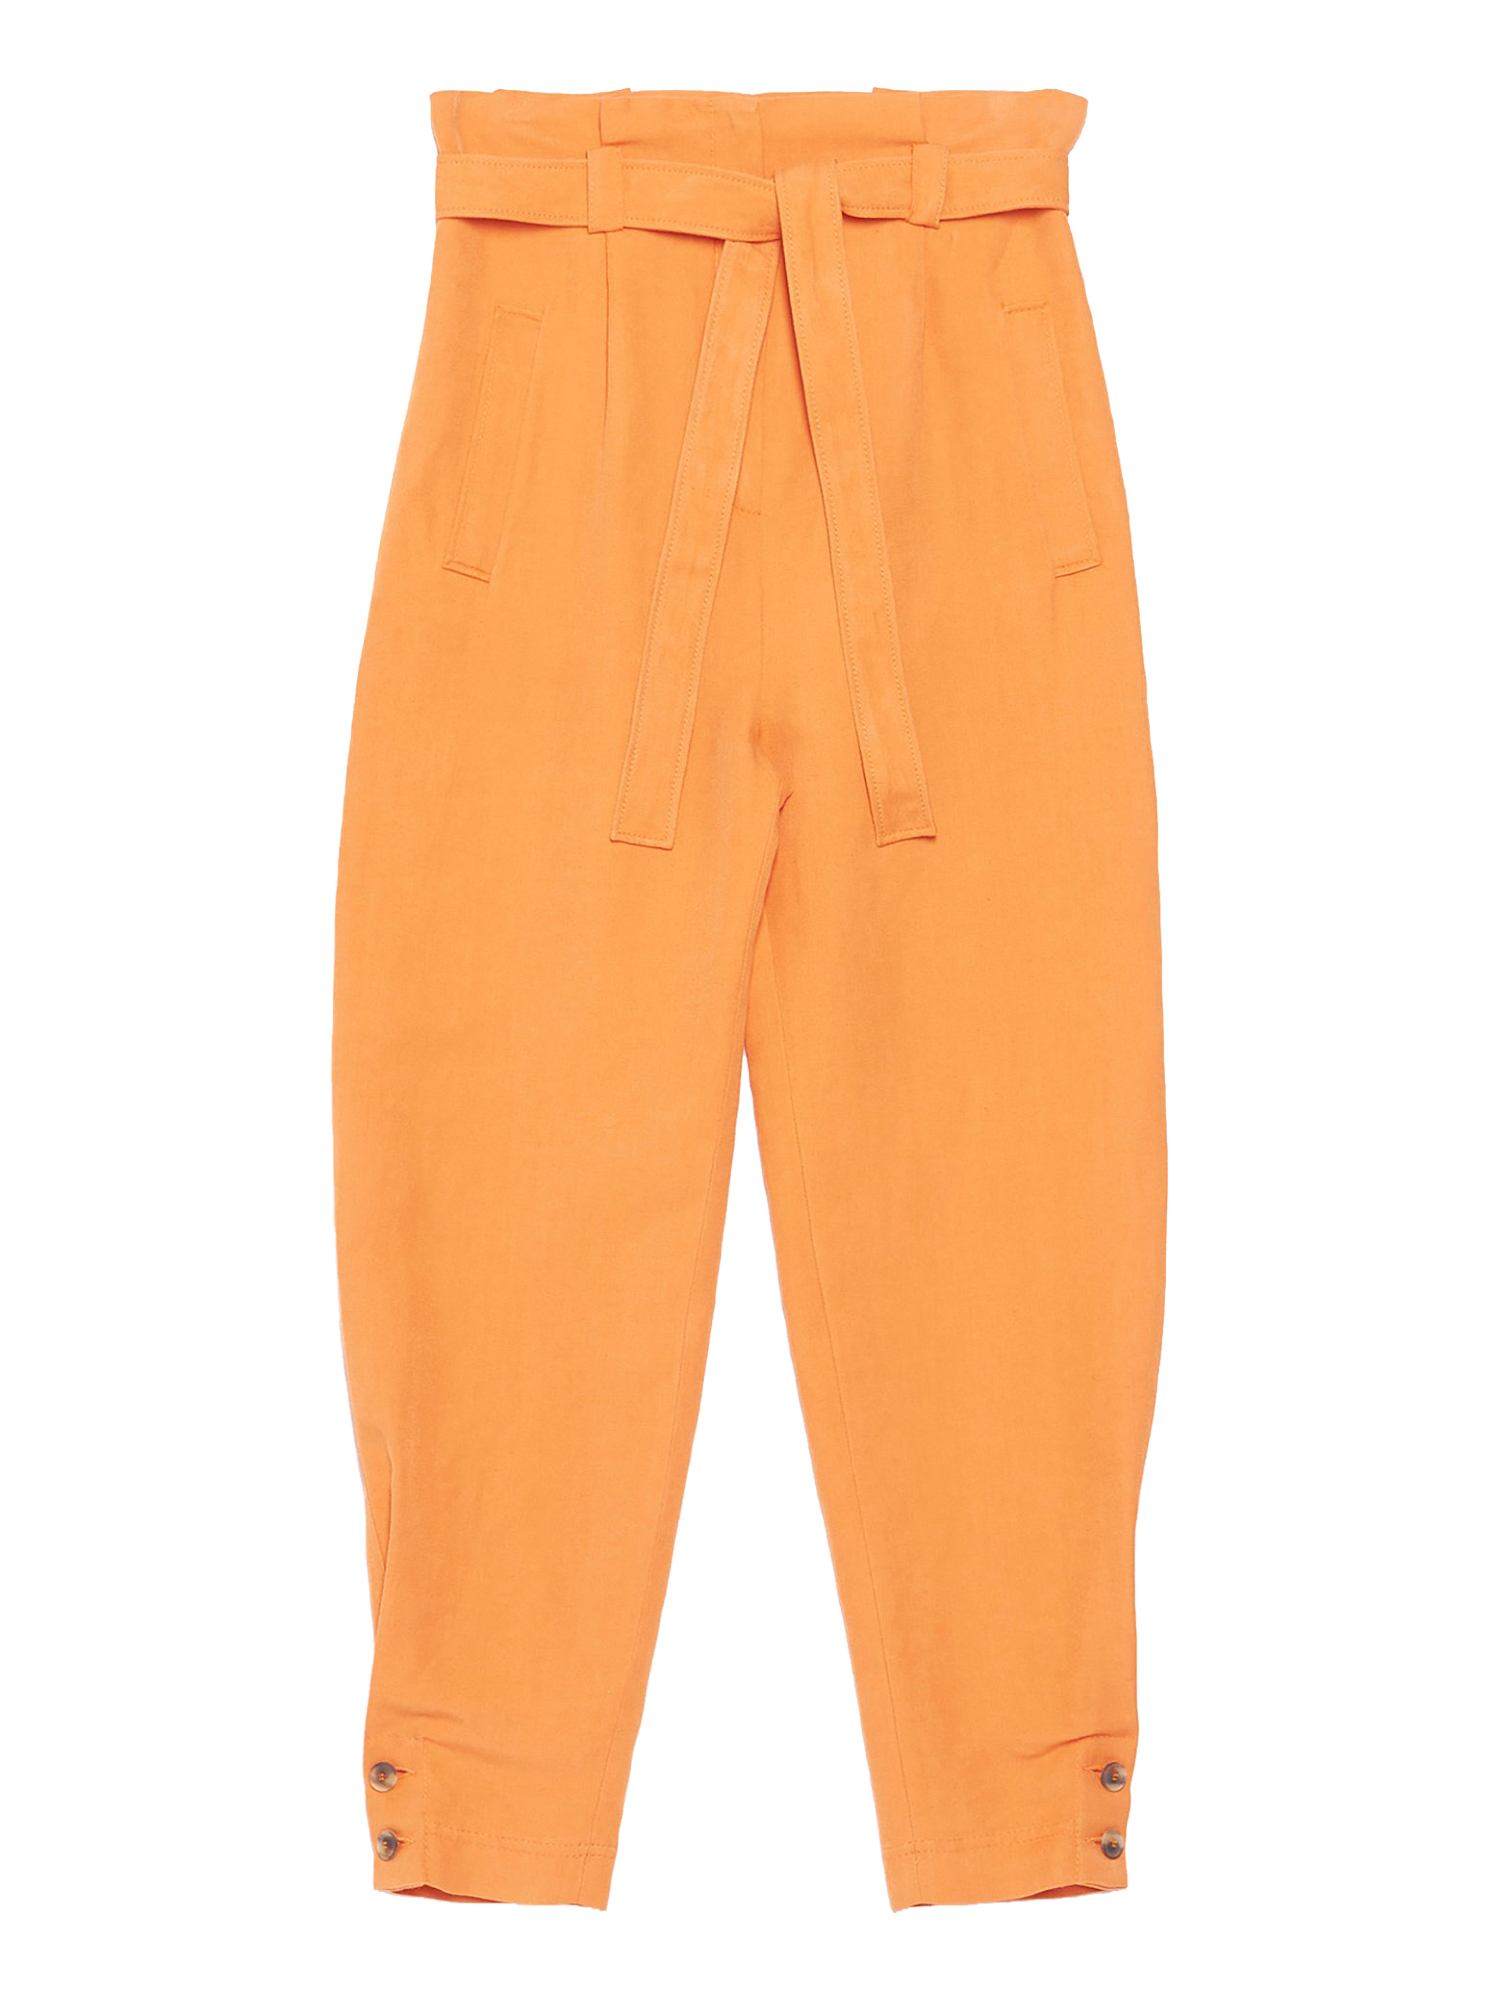 Condition: New With Tag,  Eco-Friendly Fabric, Color: Orange - S - IT 40 -